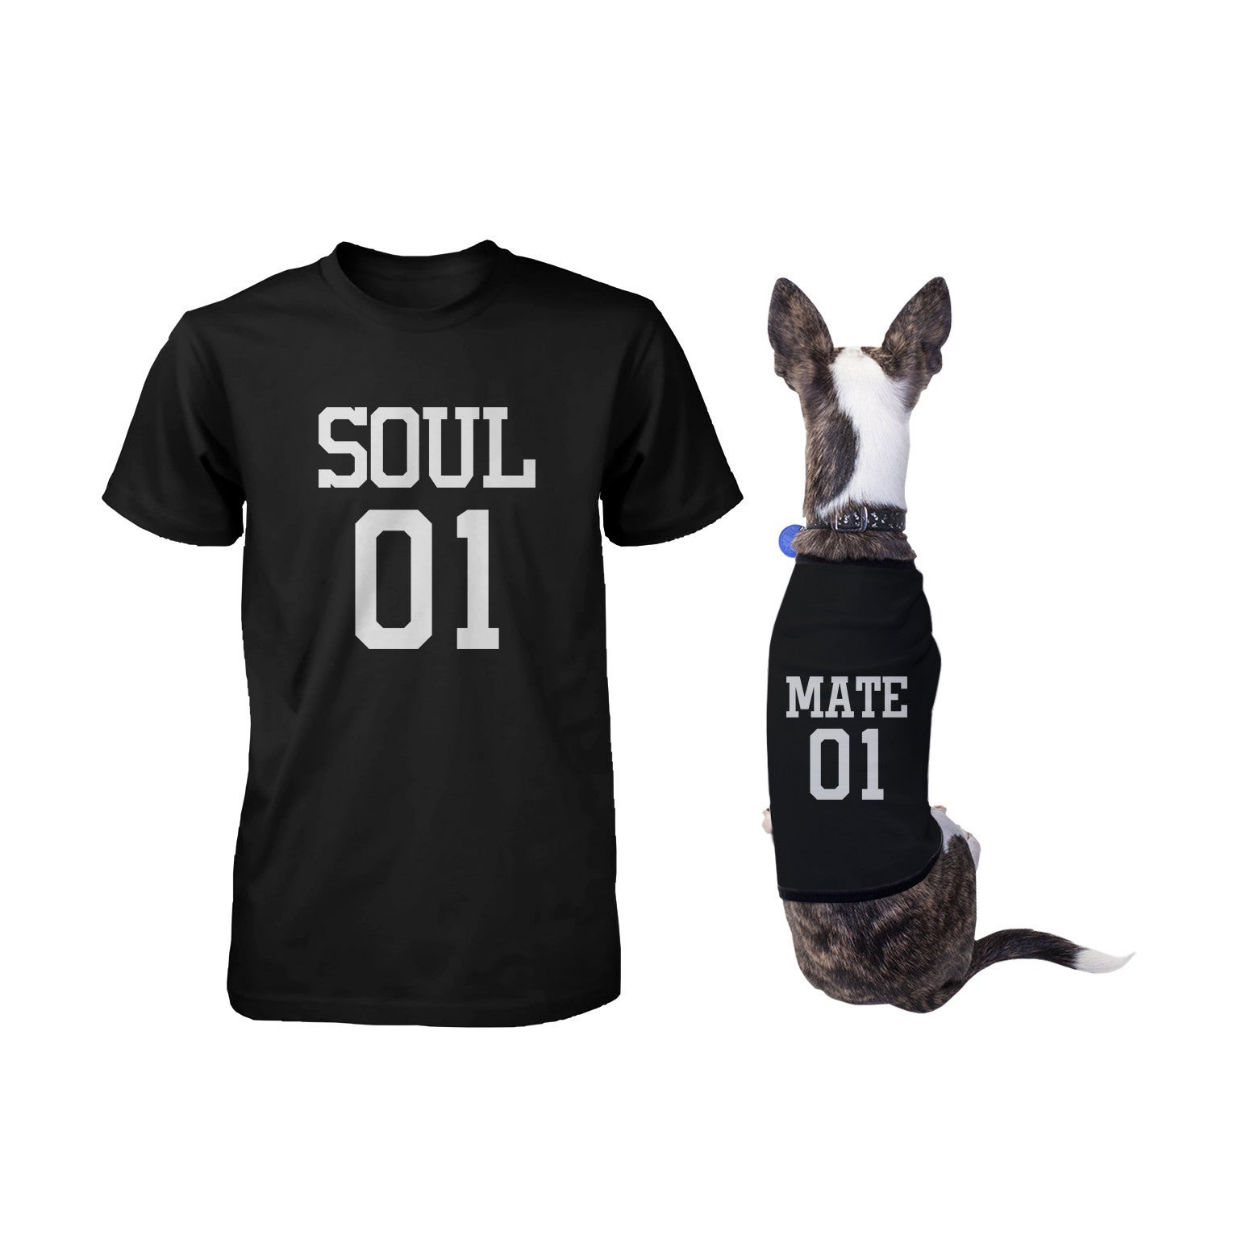 Soulmate Matching T-Shirts For Pet And Owner Funny Tees For Dog And Human - 365 In Love